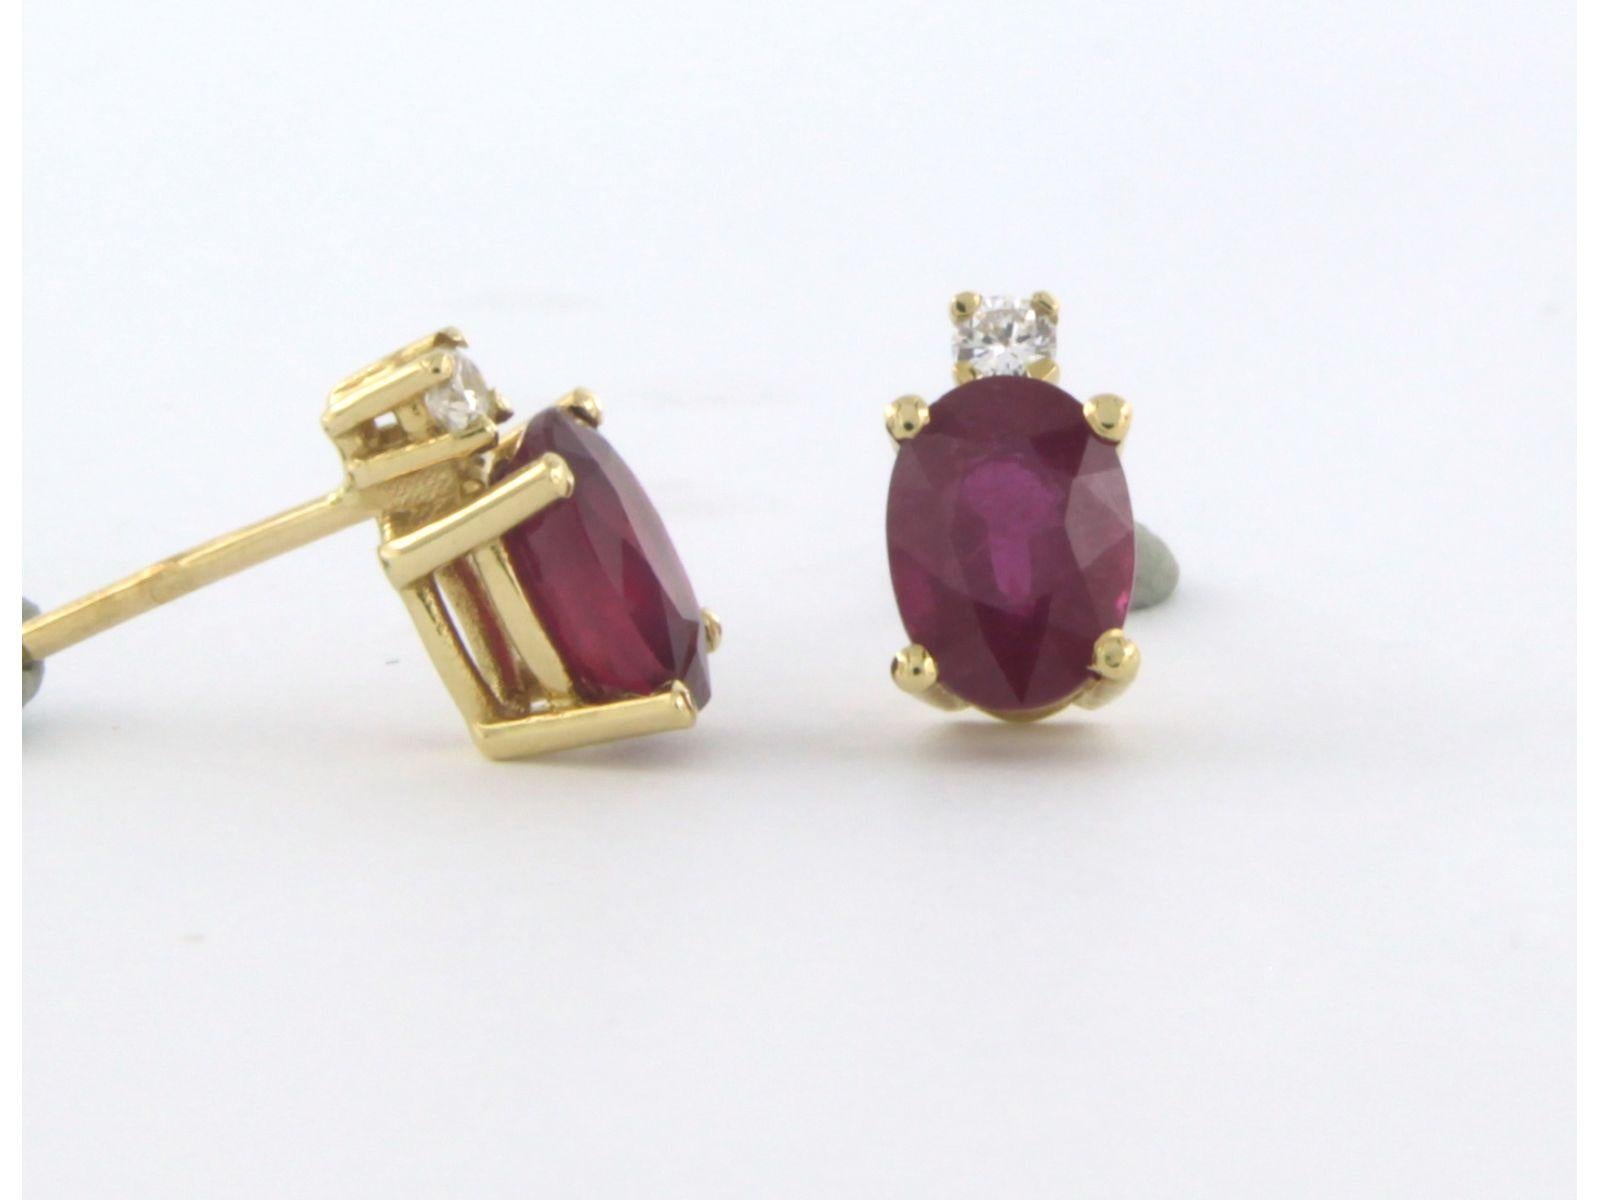 Brilliant Cut Earrings with ruby and diamonds 18k yellow gold For Sale